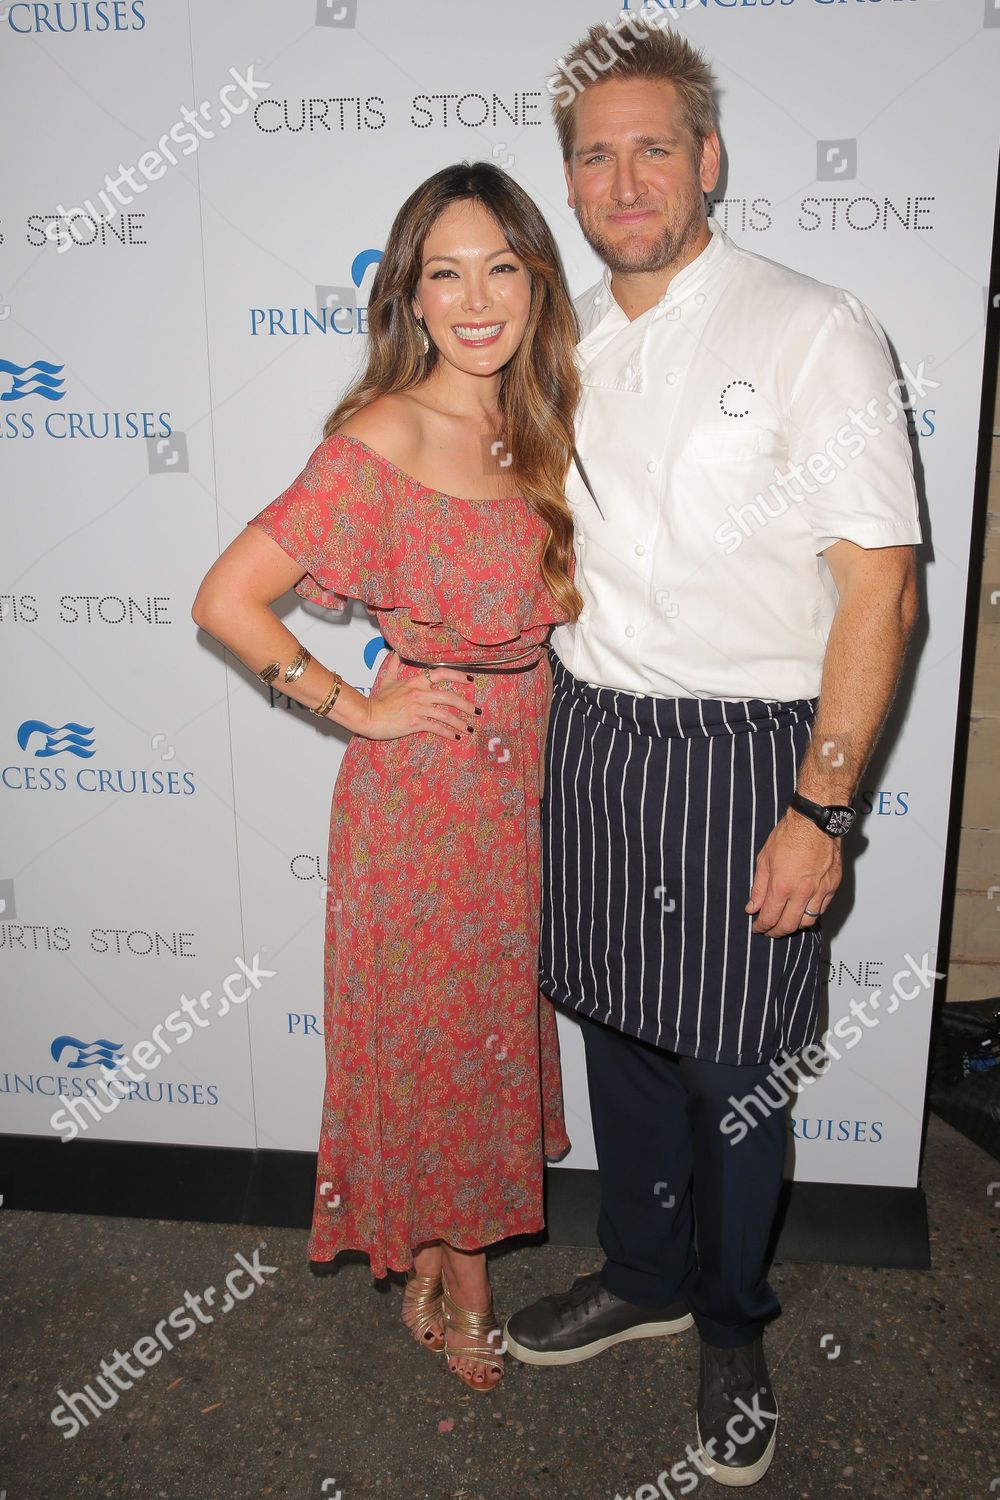 The Truth About Curtis Stone's Relationship With Actress Lindsay Price